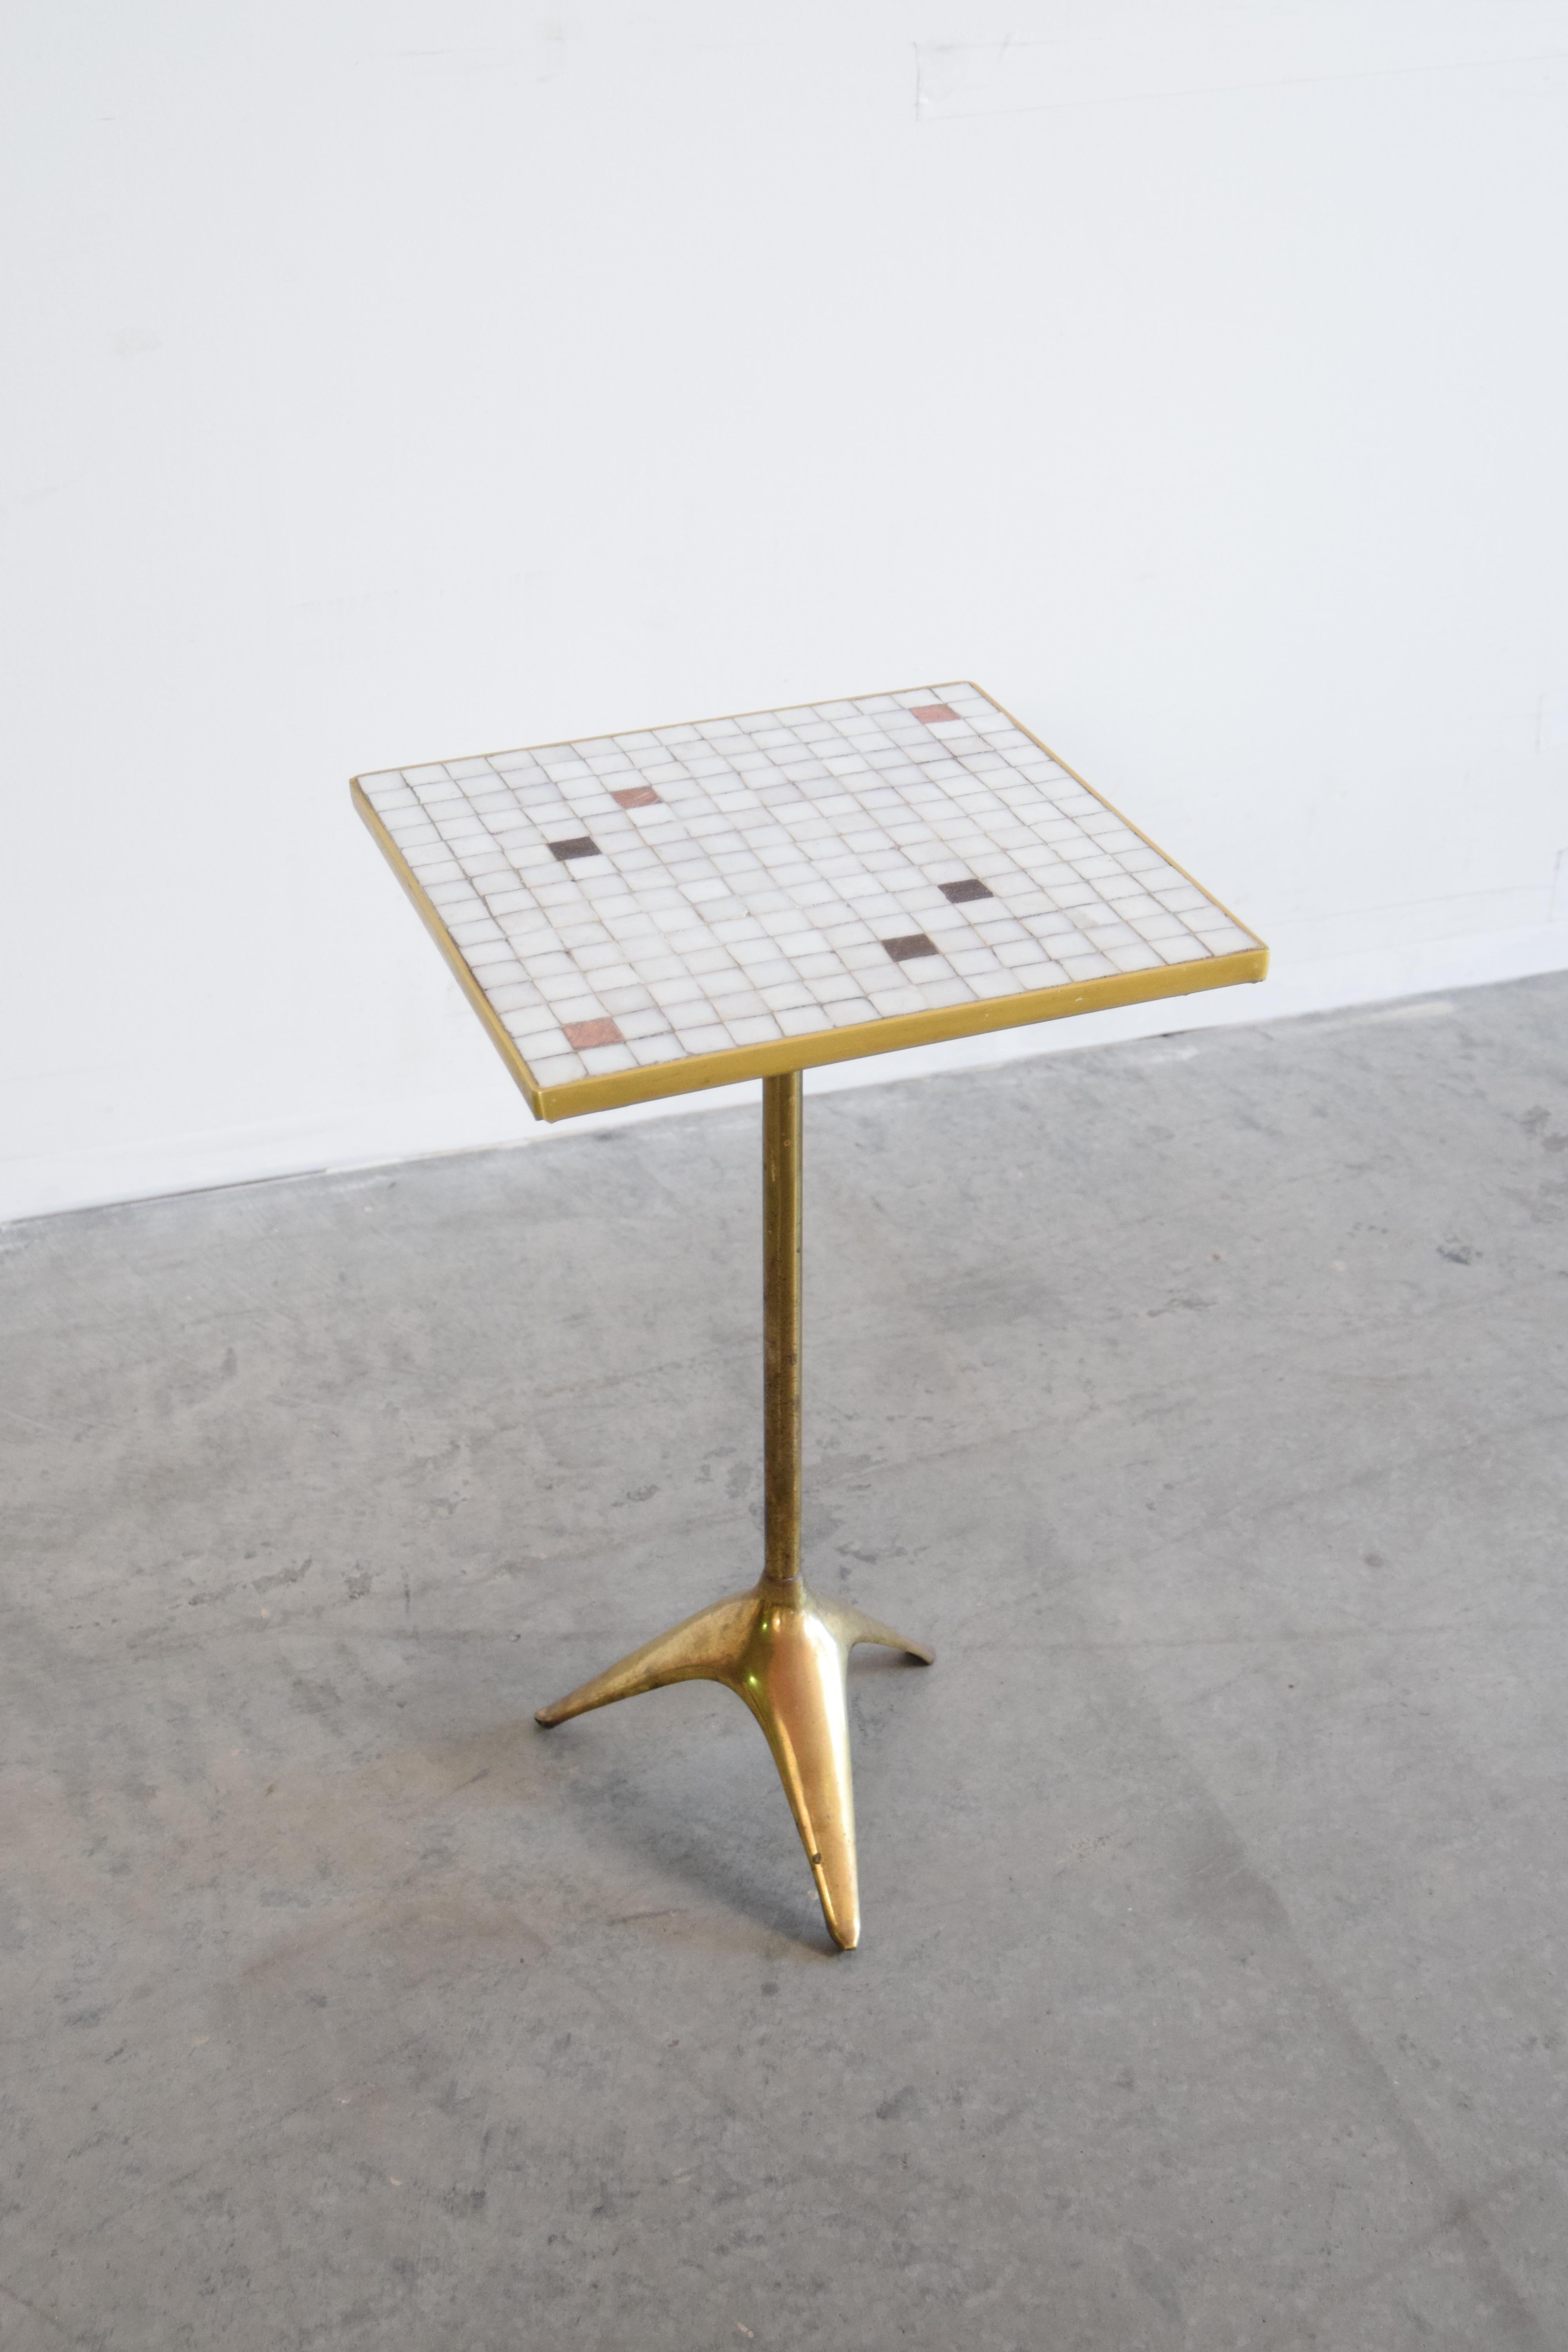 Brass and Murano glass tile top table, designed by Ben Seibel (1918 - 1985), circa 1966. 

Ben Seibel was an American industrial designed particularly known for his tableware. He began his studies in architecture at Columbia University, where he